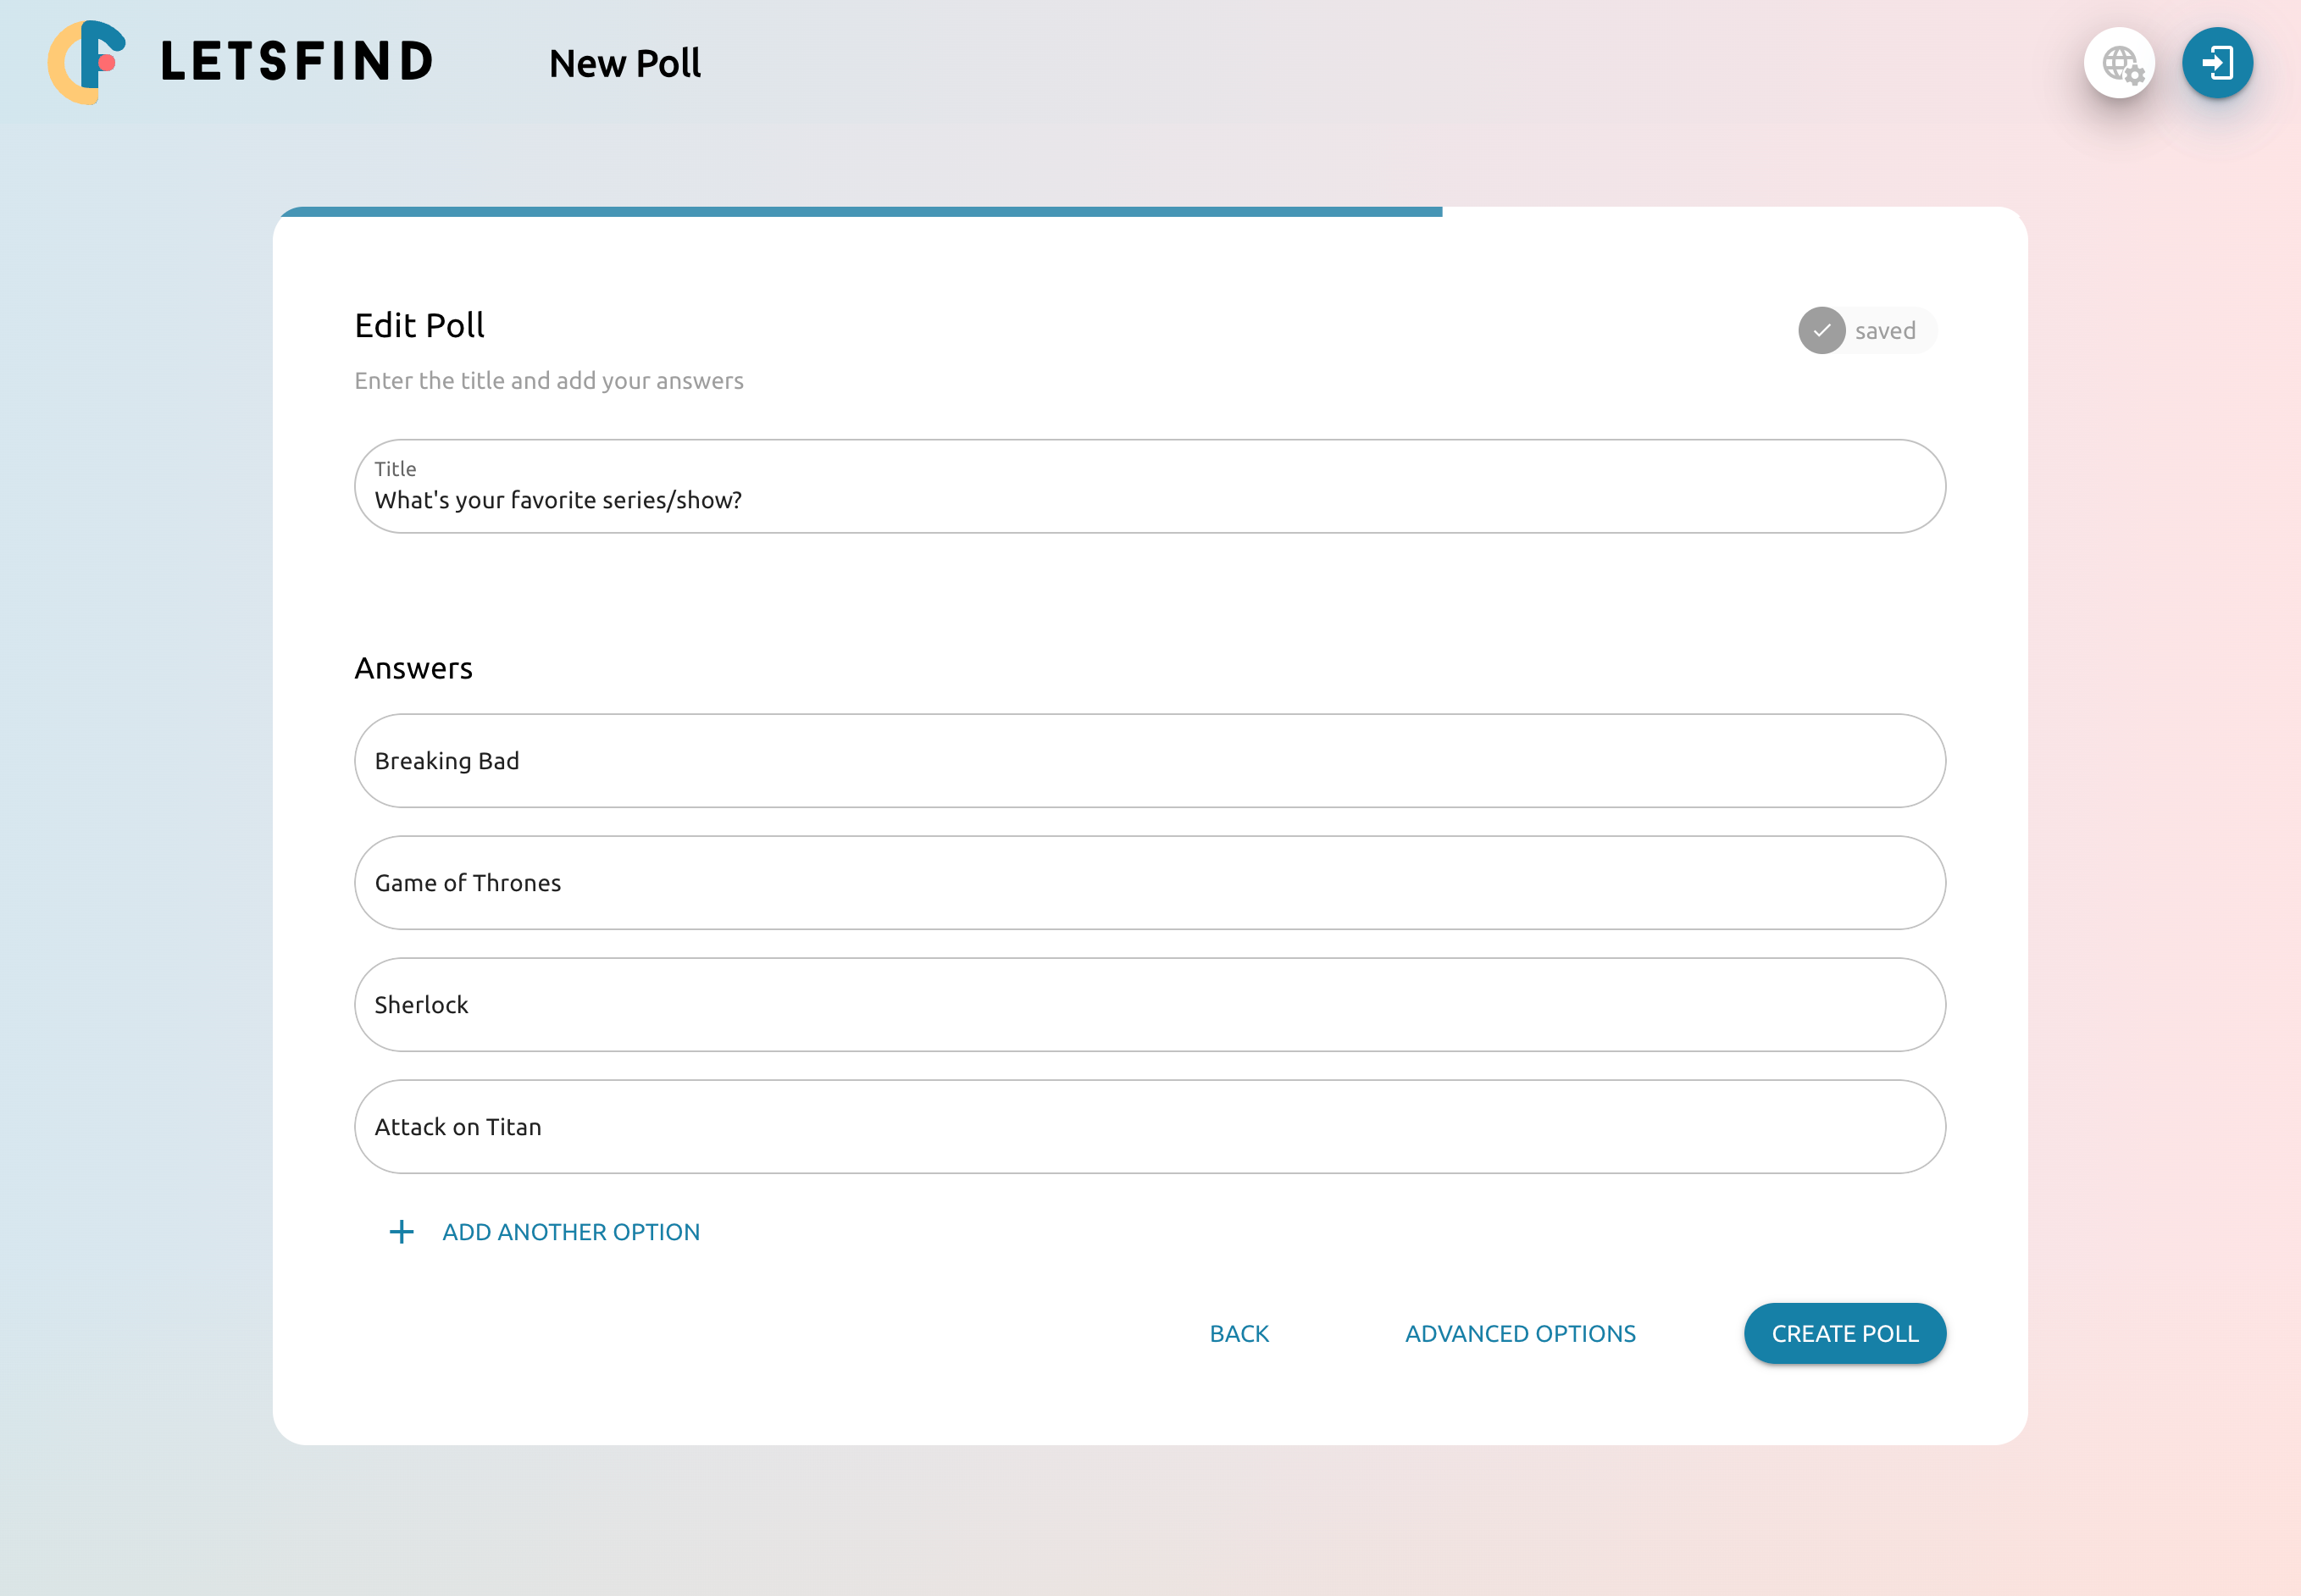 Whatever you need to decide and whoever you'd like to decide it with. Letsfind is ready for all types of polls.